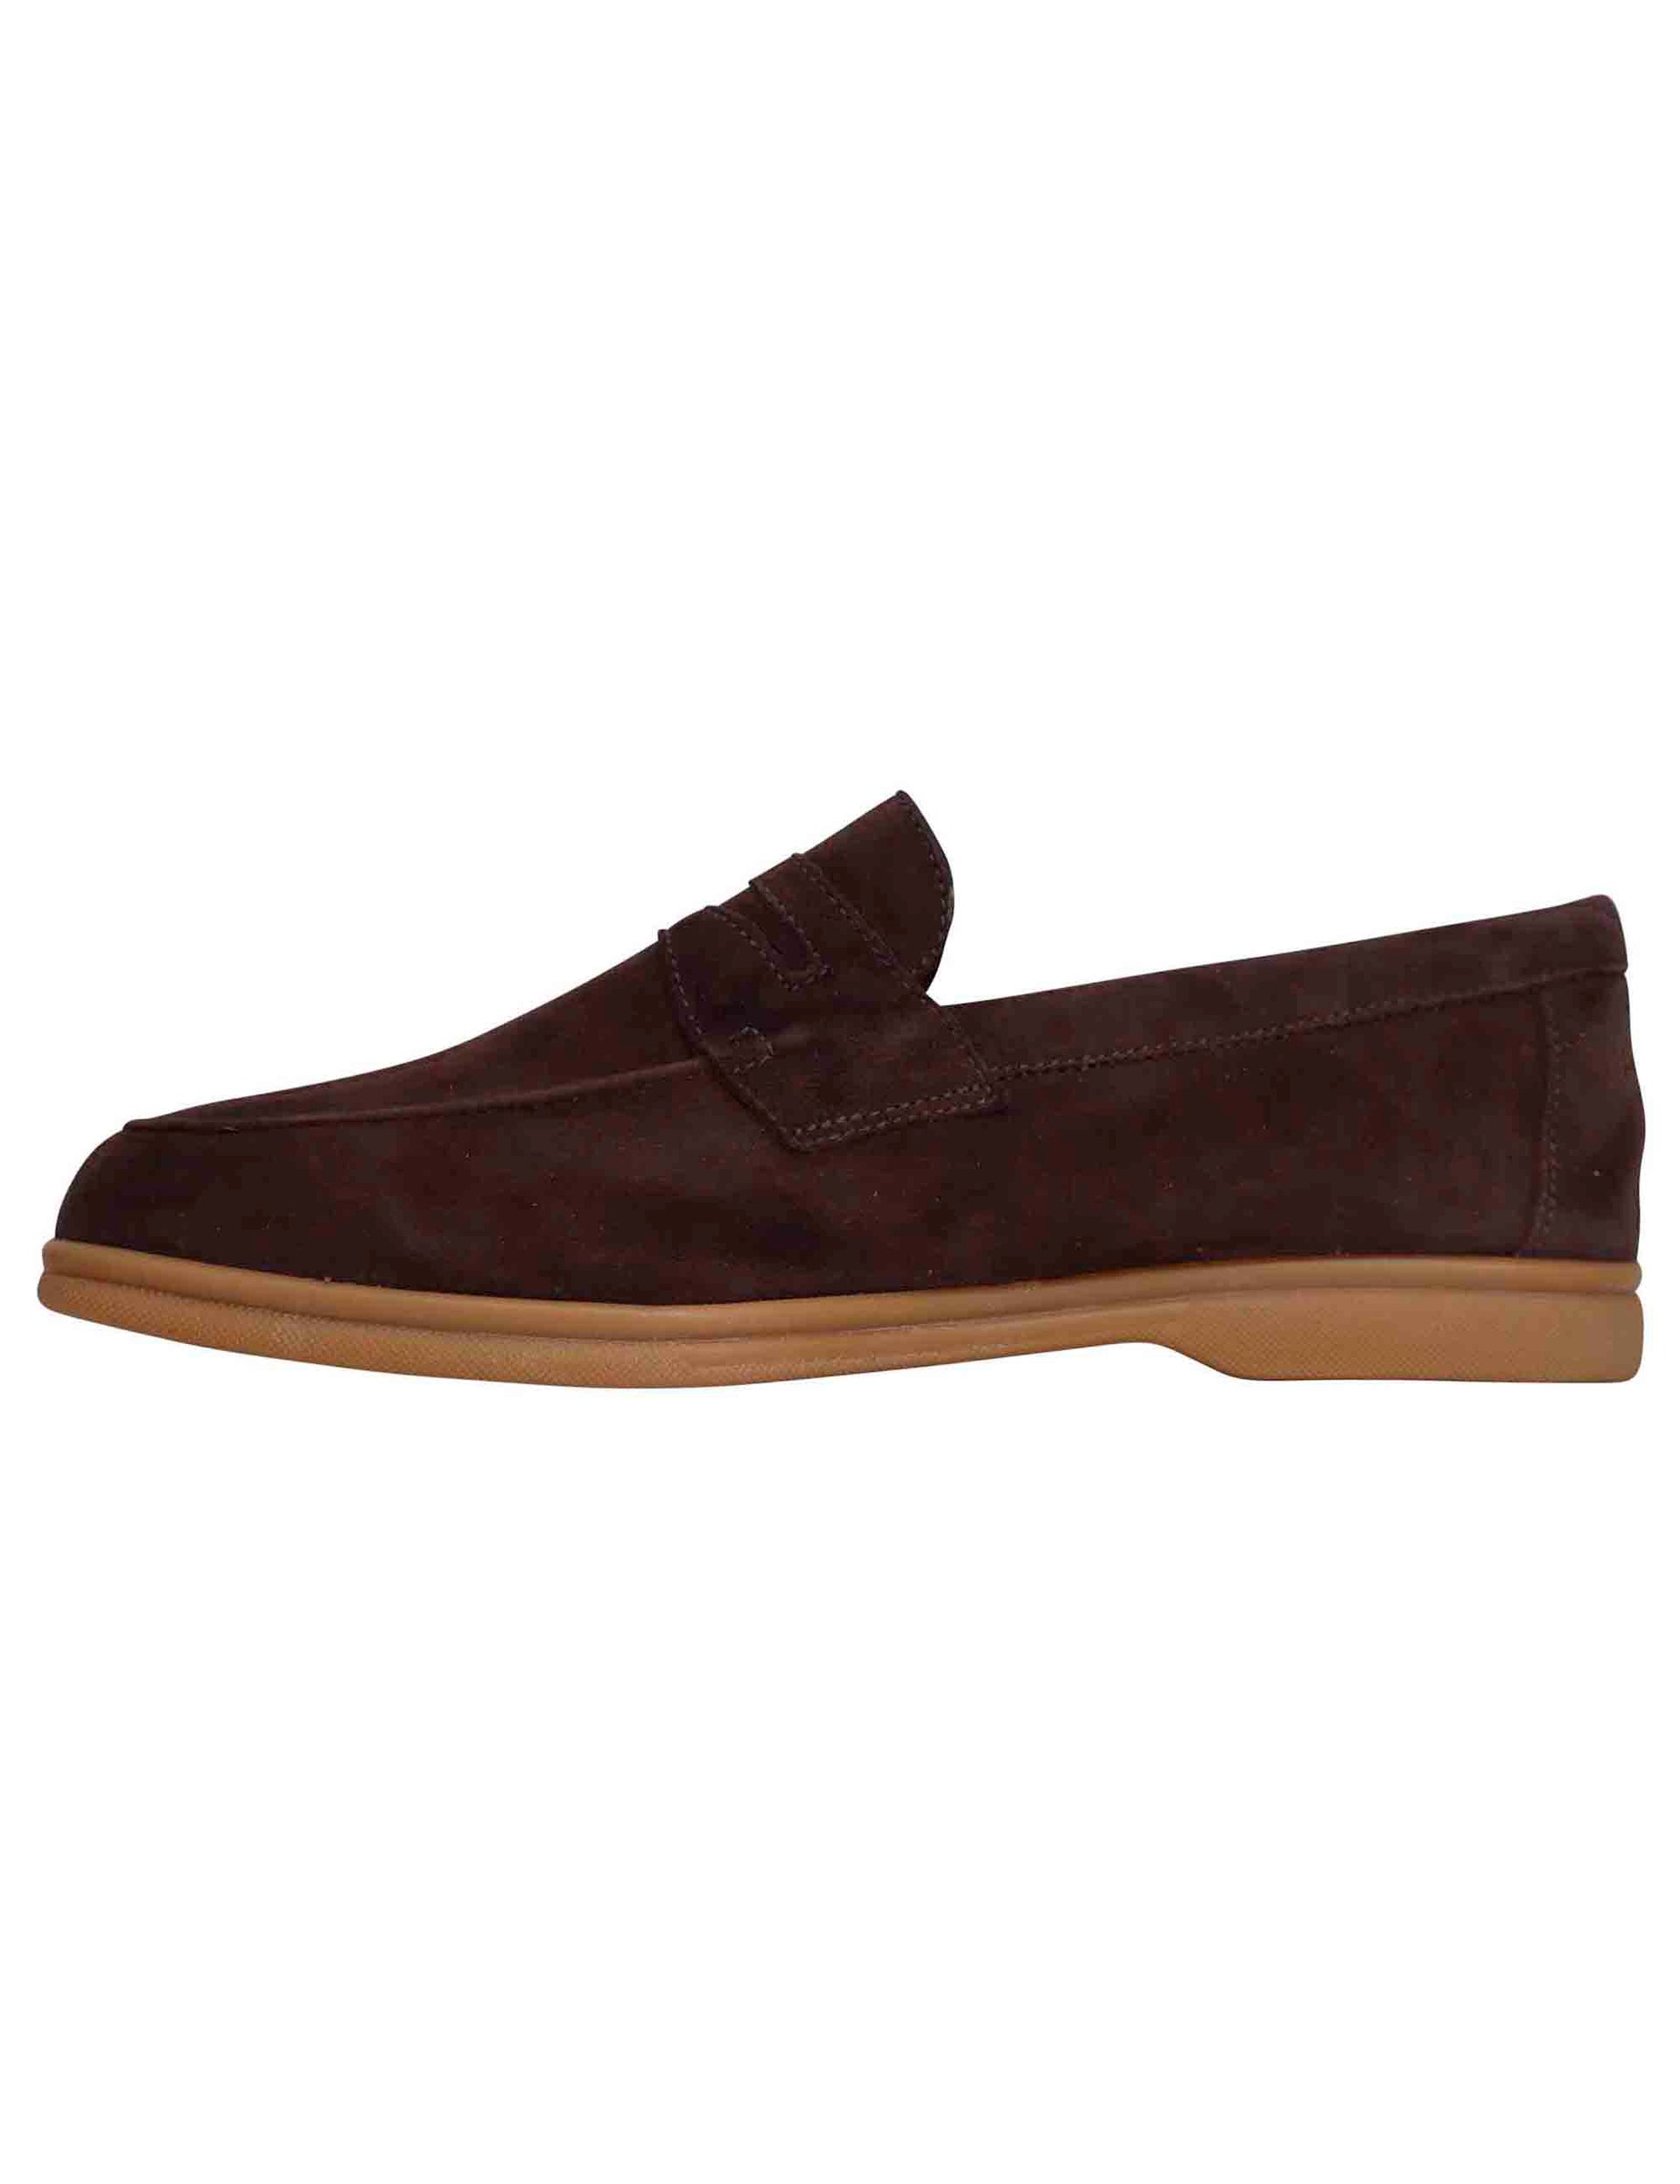 Men's moccasins in dark brown suede with light rubber sole